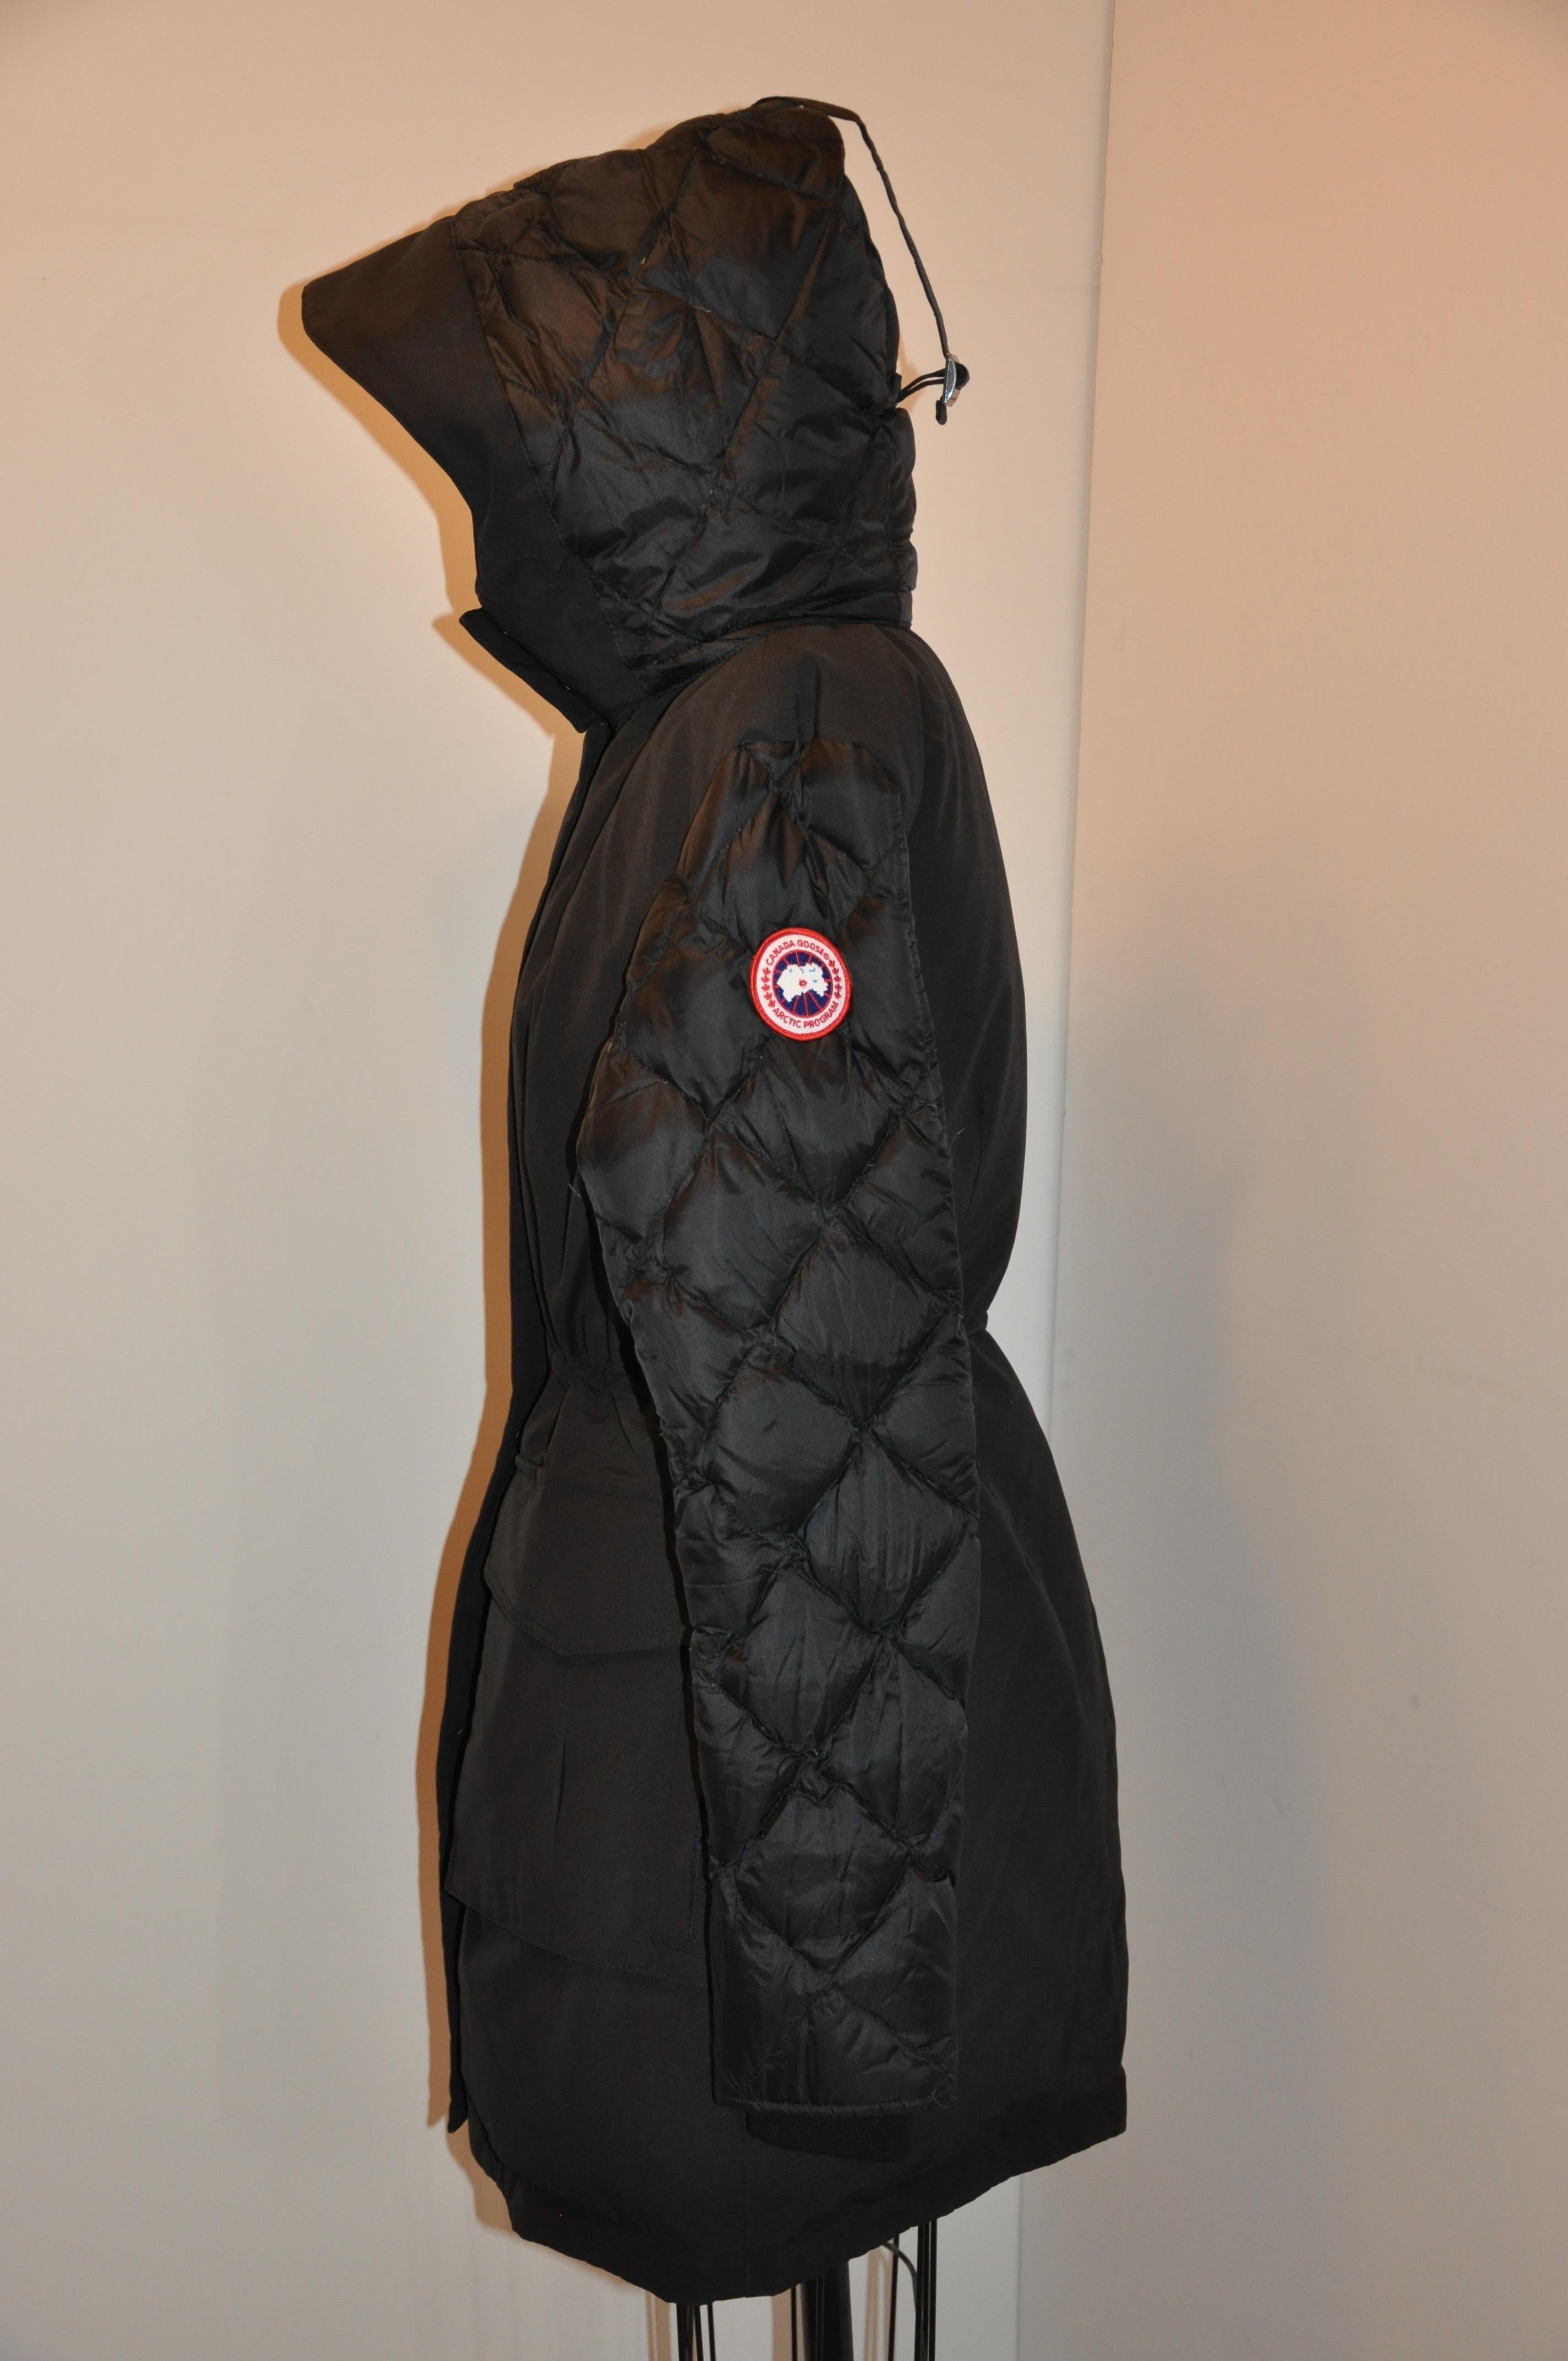 is the fur collar removable in canada goose coat